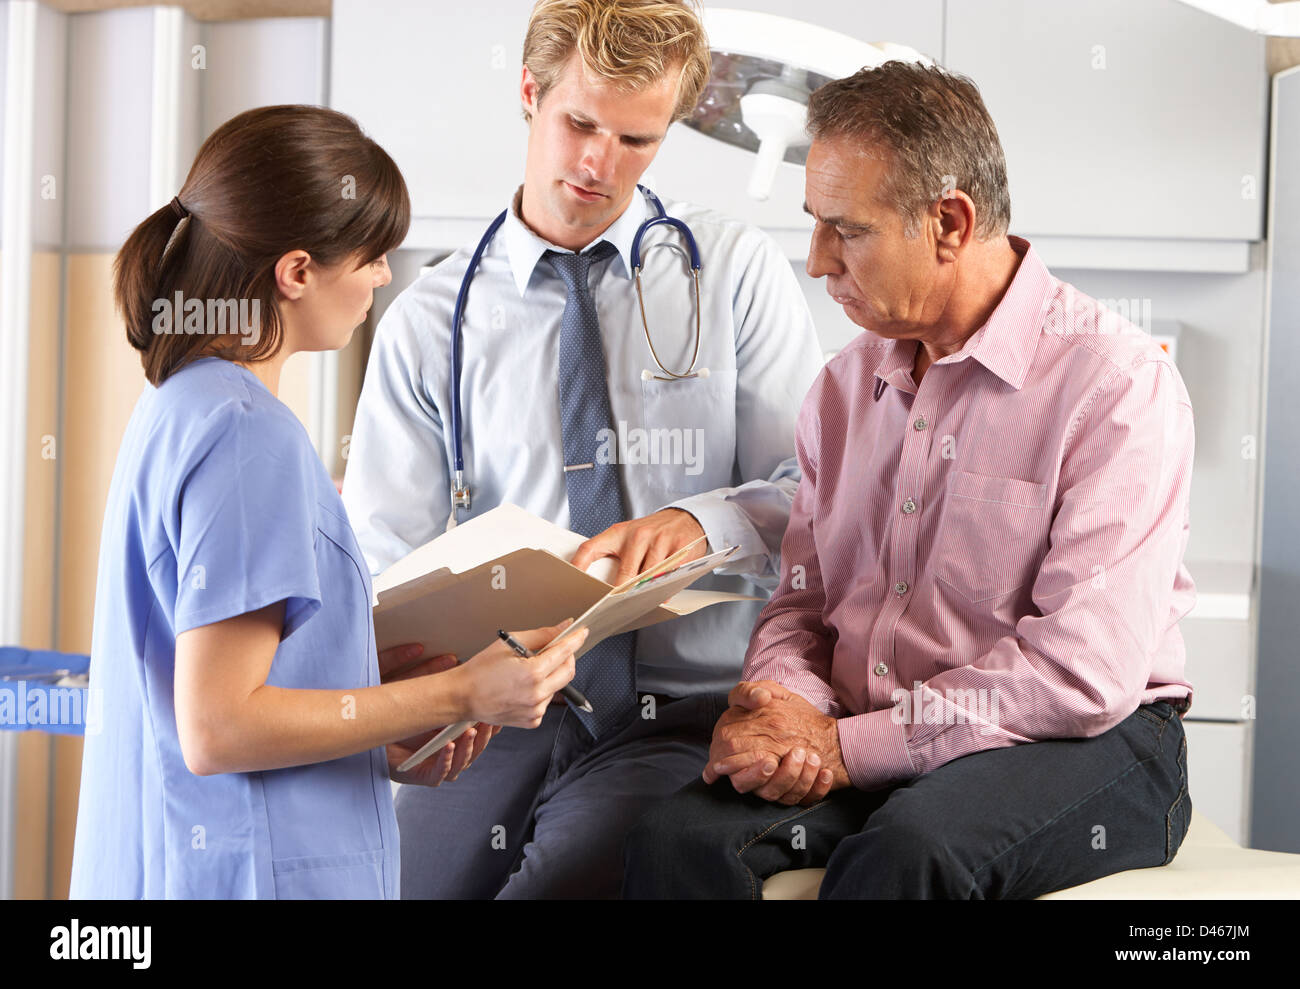 Male Patient Being Examined By Doctor And Intern Stock Photo